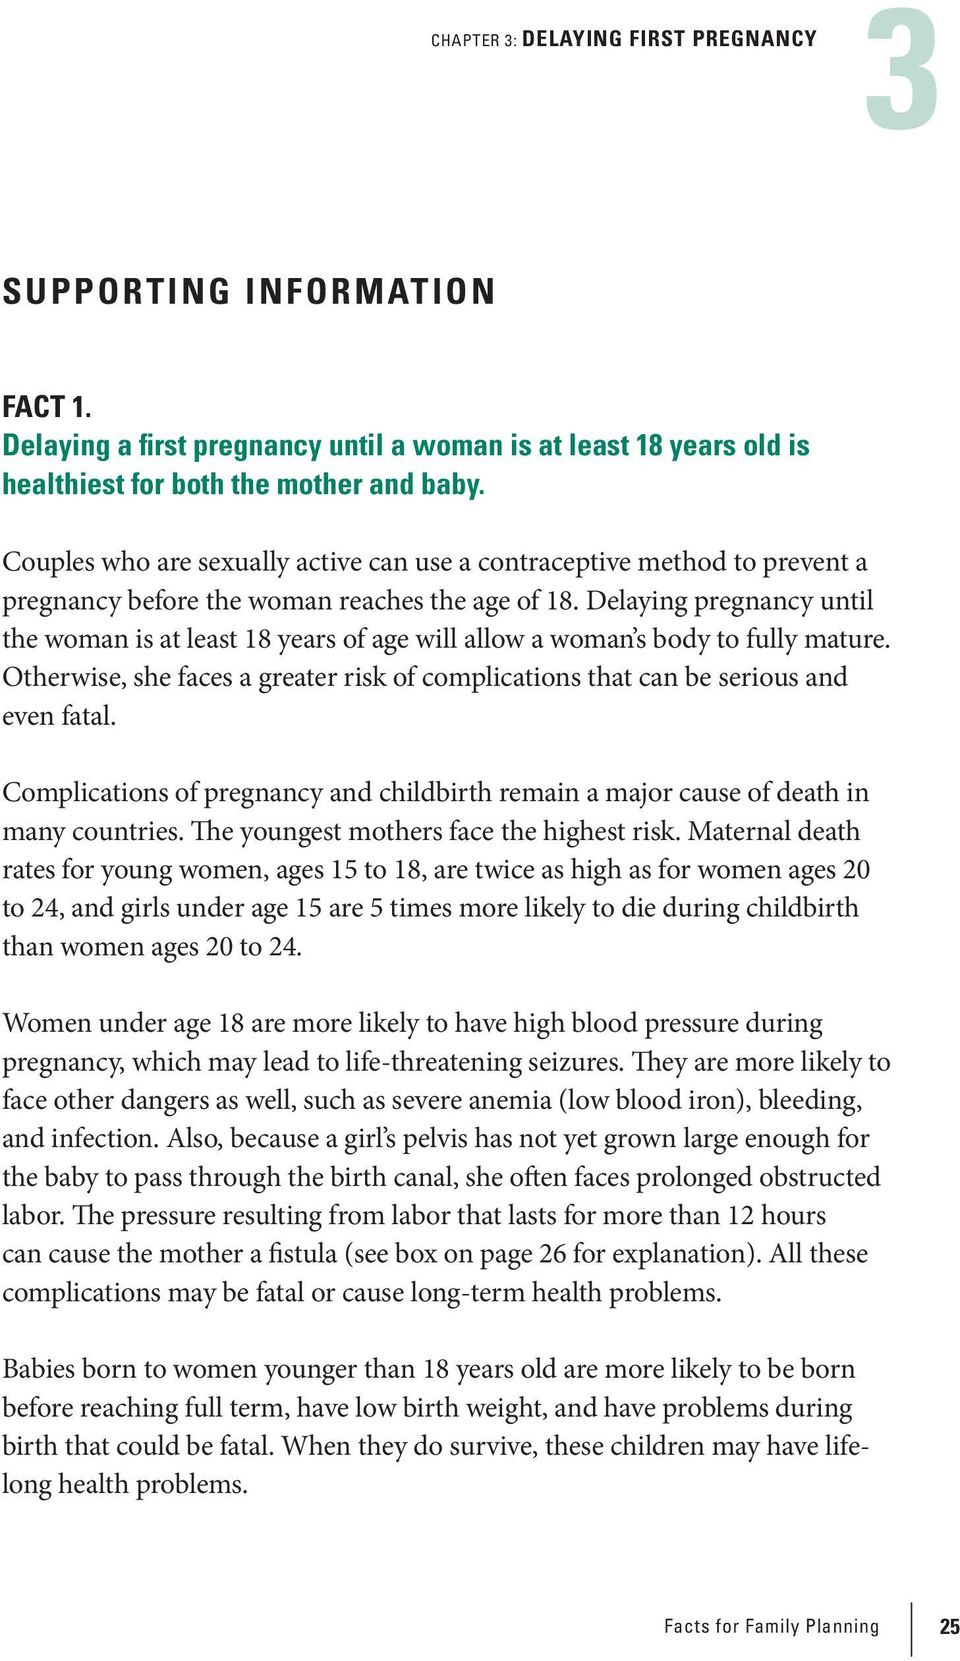 Delaying pregnancy until the woman is at least 18 years of age will allow a woman s body to fully mature. Otherwise, she faces a greater risk of complications that can be serious and even fatal.